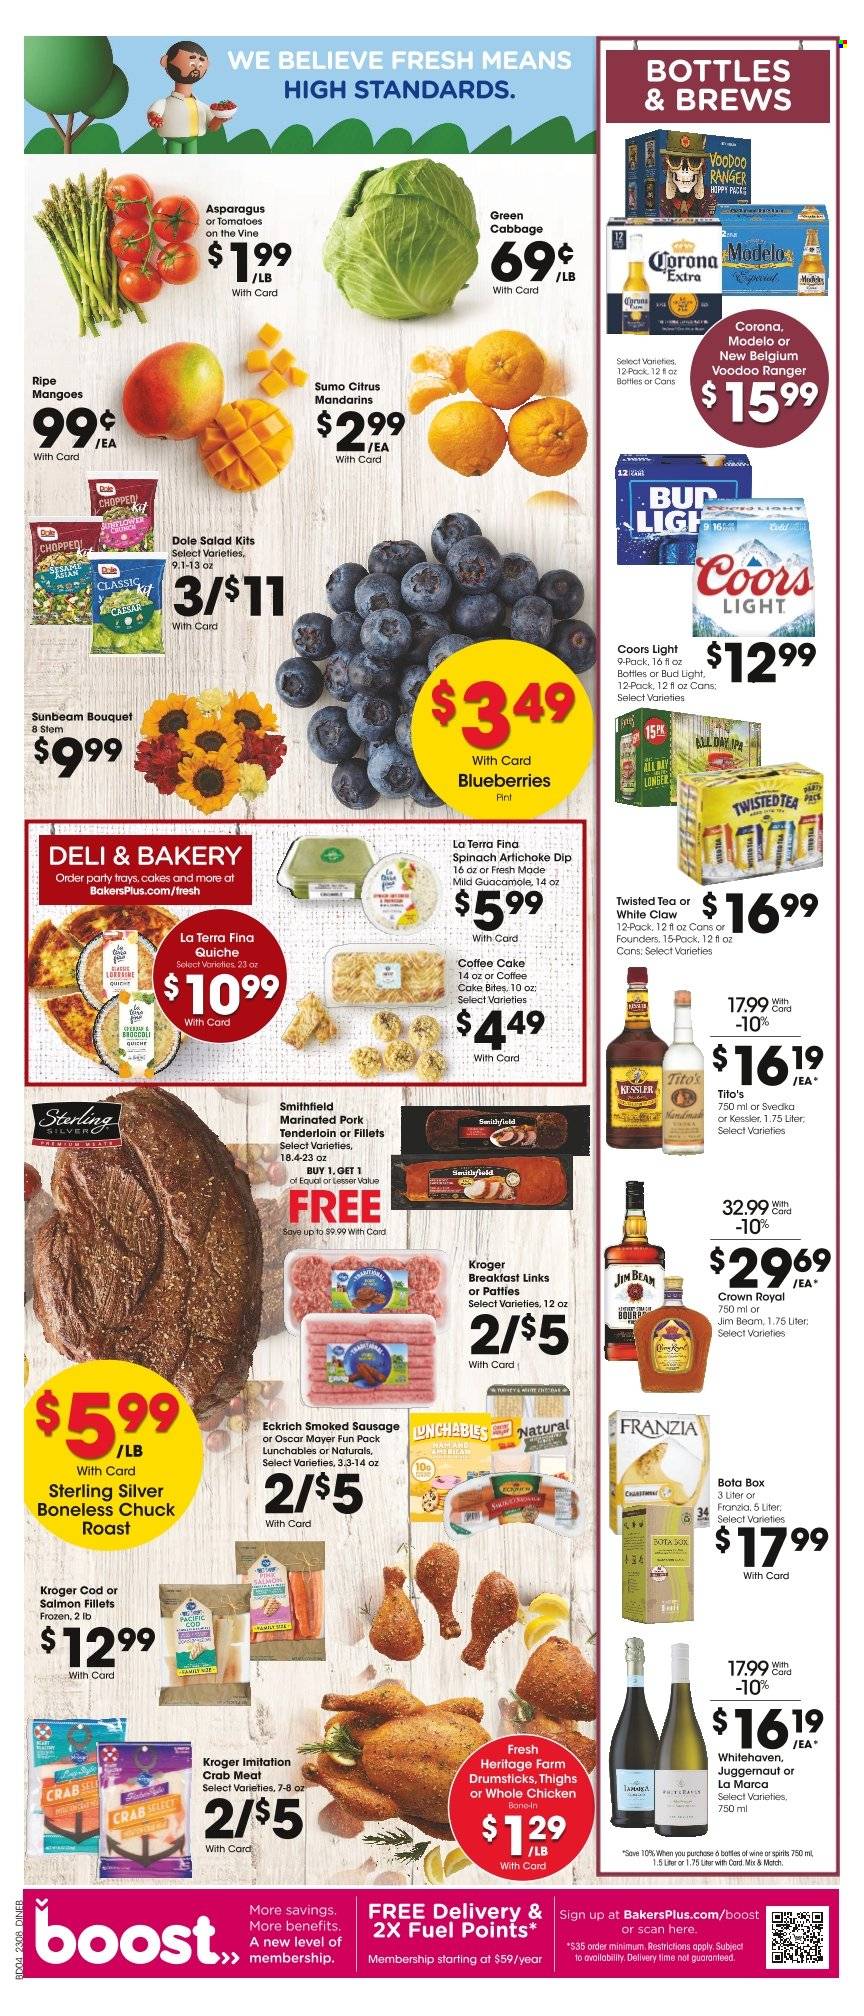 thumbnail - Baker's Flyer - 03/22/2023 - 03/28/2023 - Sales products - cake, coffee cake, asparagus, broccoli, cabbage, tomatoes, salad, Dole, blueberries, mandarines, mango, cod, crab meat, salmon fillet, crab, Lunchables, roast, Oscar Mayer, sausage, smoked sausage, guacamole, dip, Boost, tea, wine, Jim Beam, White Claw, beer, Bud Light, Corona Extra, IPA, Modelo, whole chicken, chicken, beef meat, chuck roast, pork meat, pork tenderloin, marinated pork, Sunbeam, sunflower, bouquet, Coors, Twisted Tea, sumo citrus. Page 5.